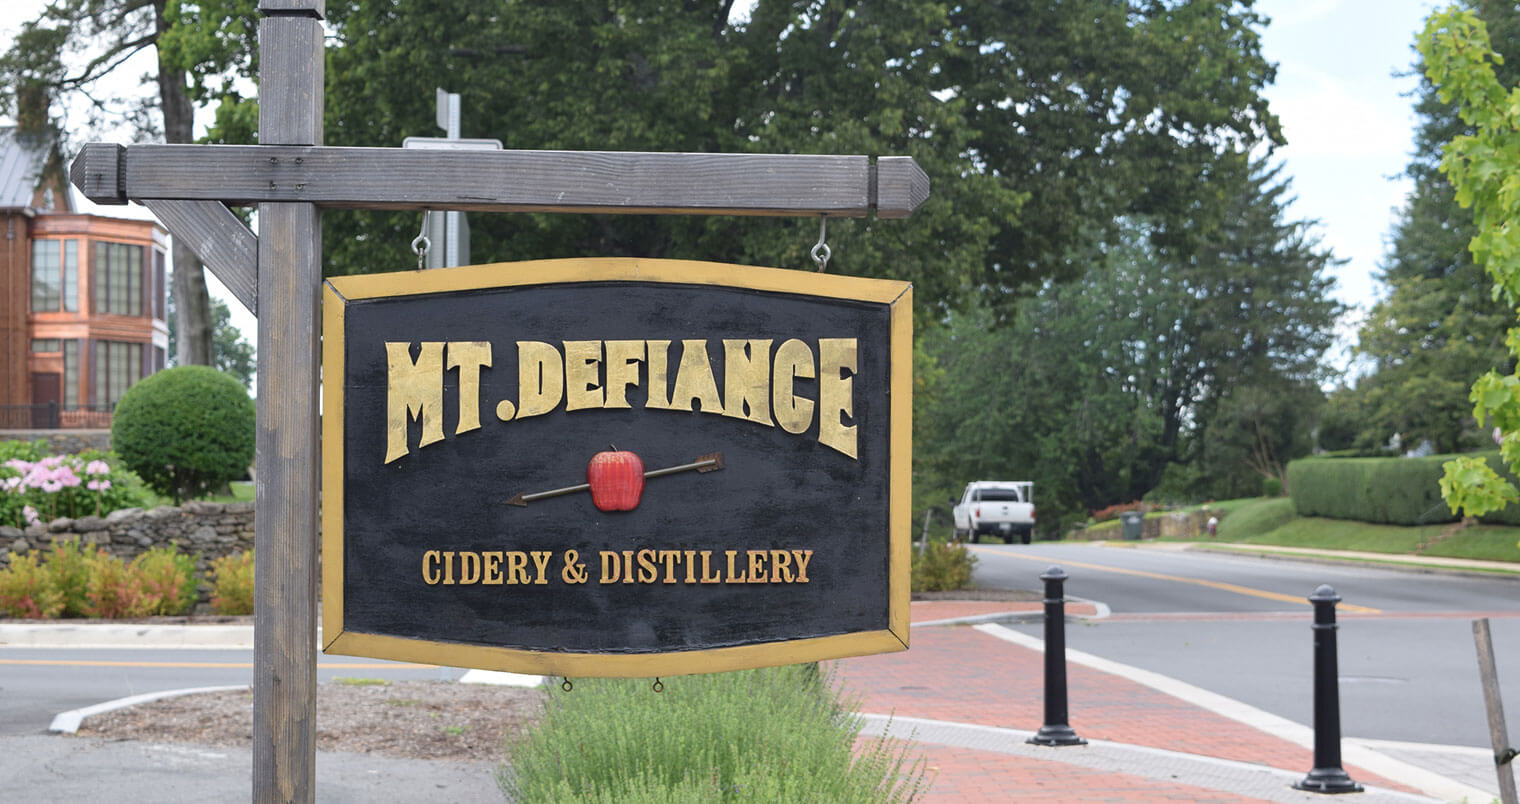 Mt. Defiance Cidery & Distillery Gear Up For Fall, featured image